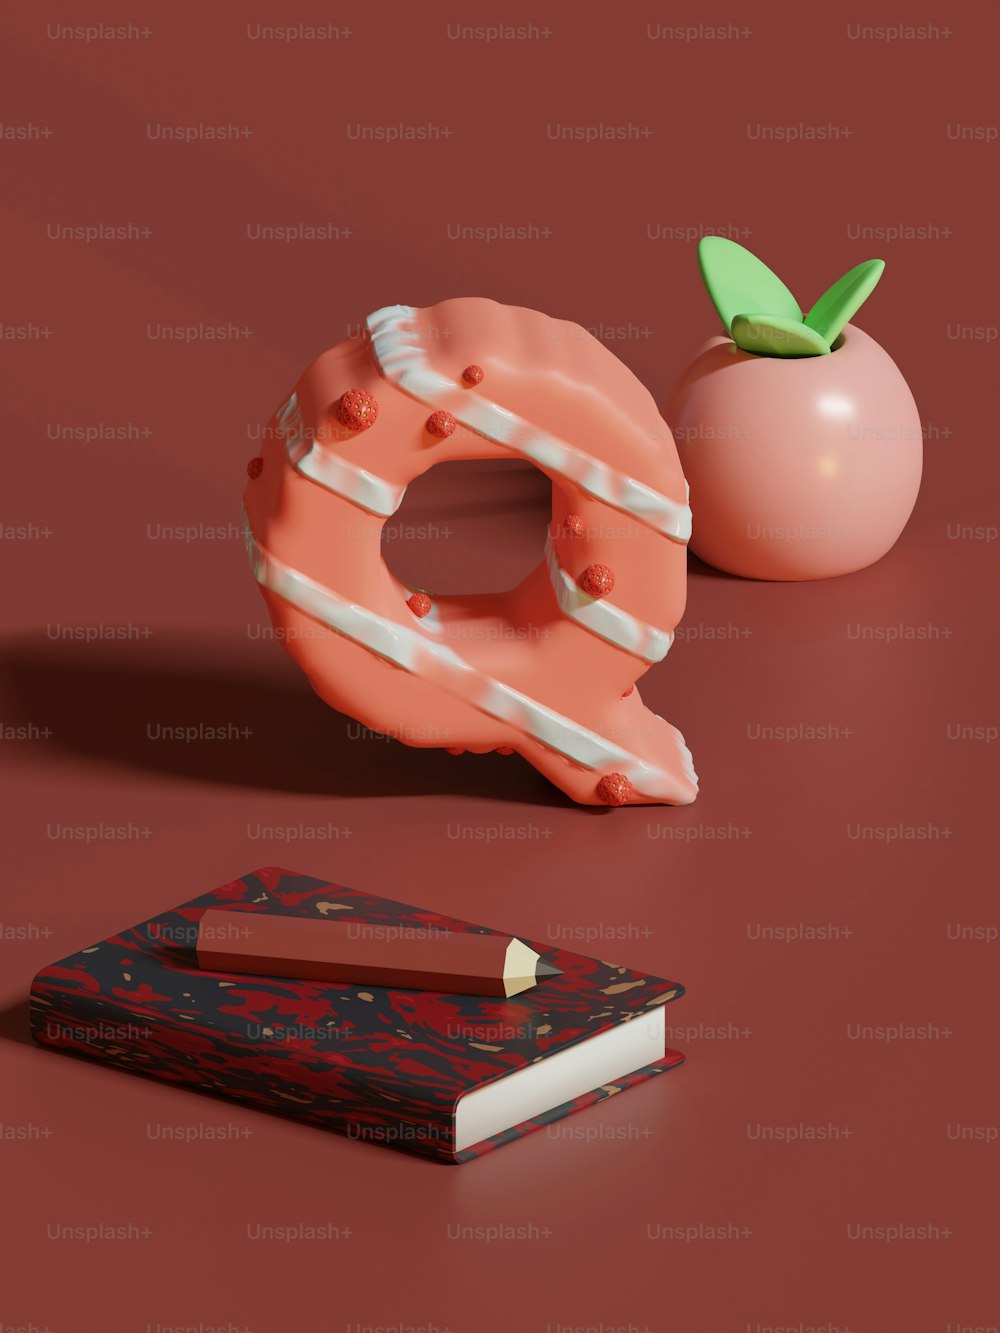 a donut and a book on a red surface